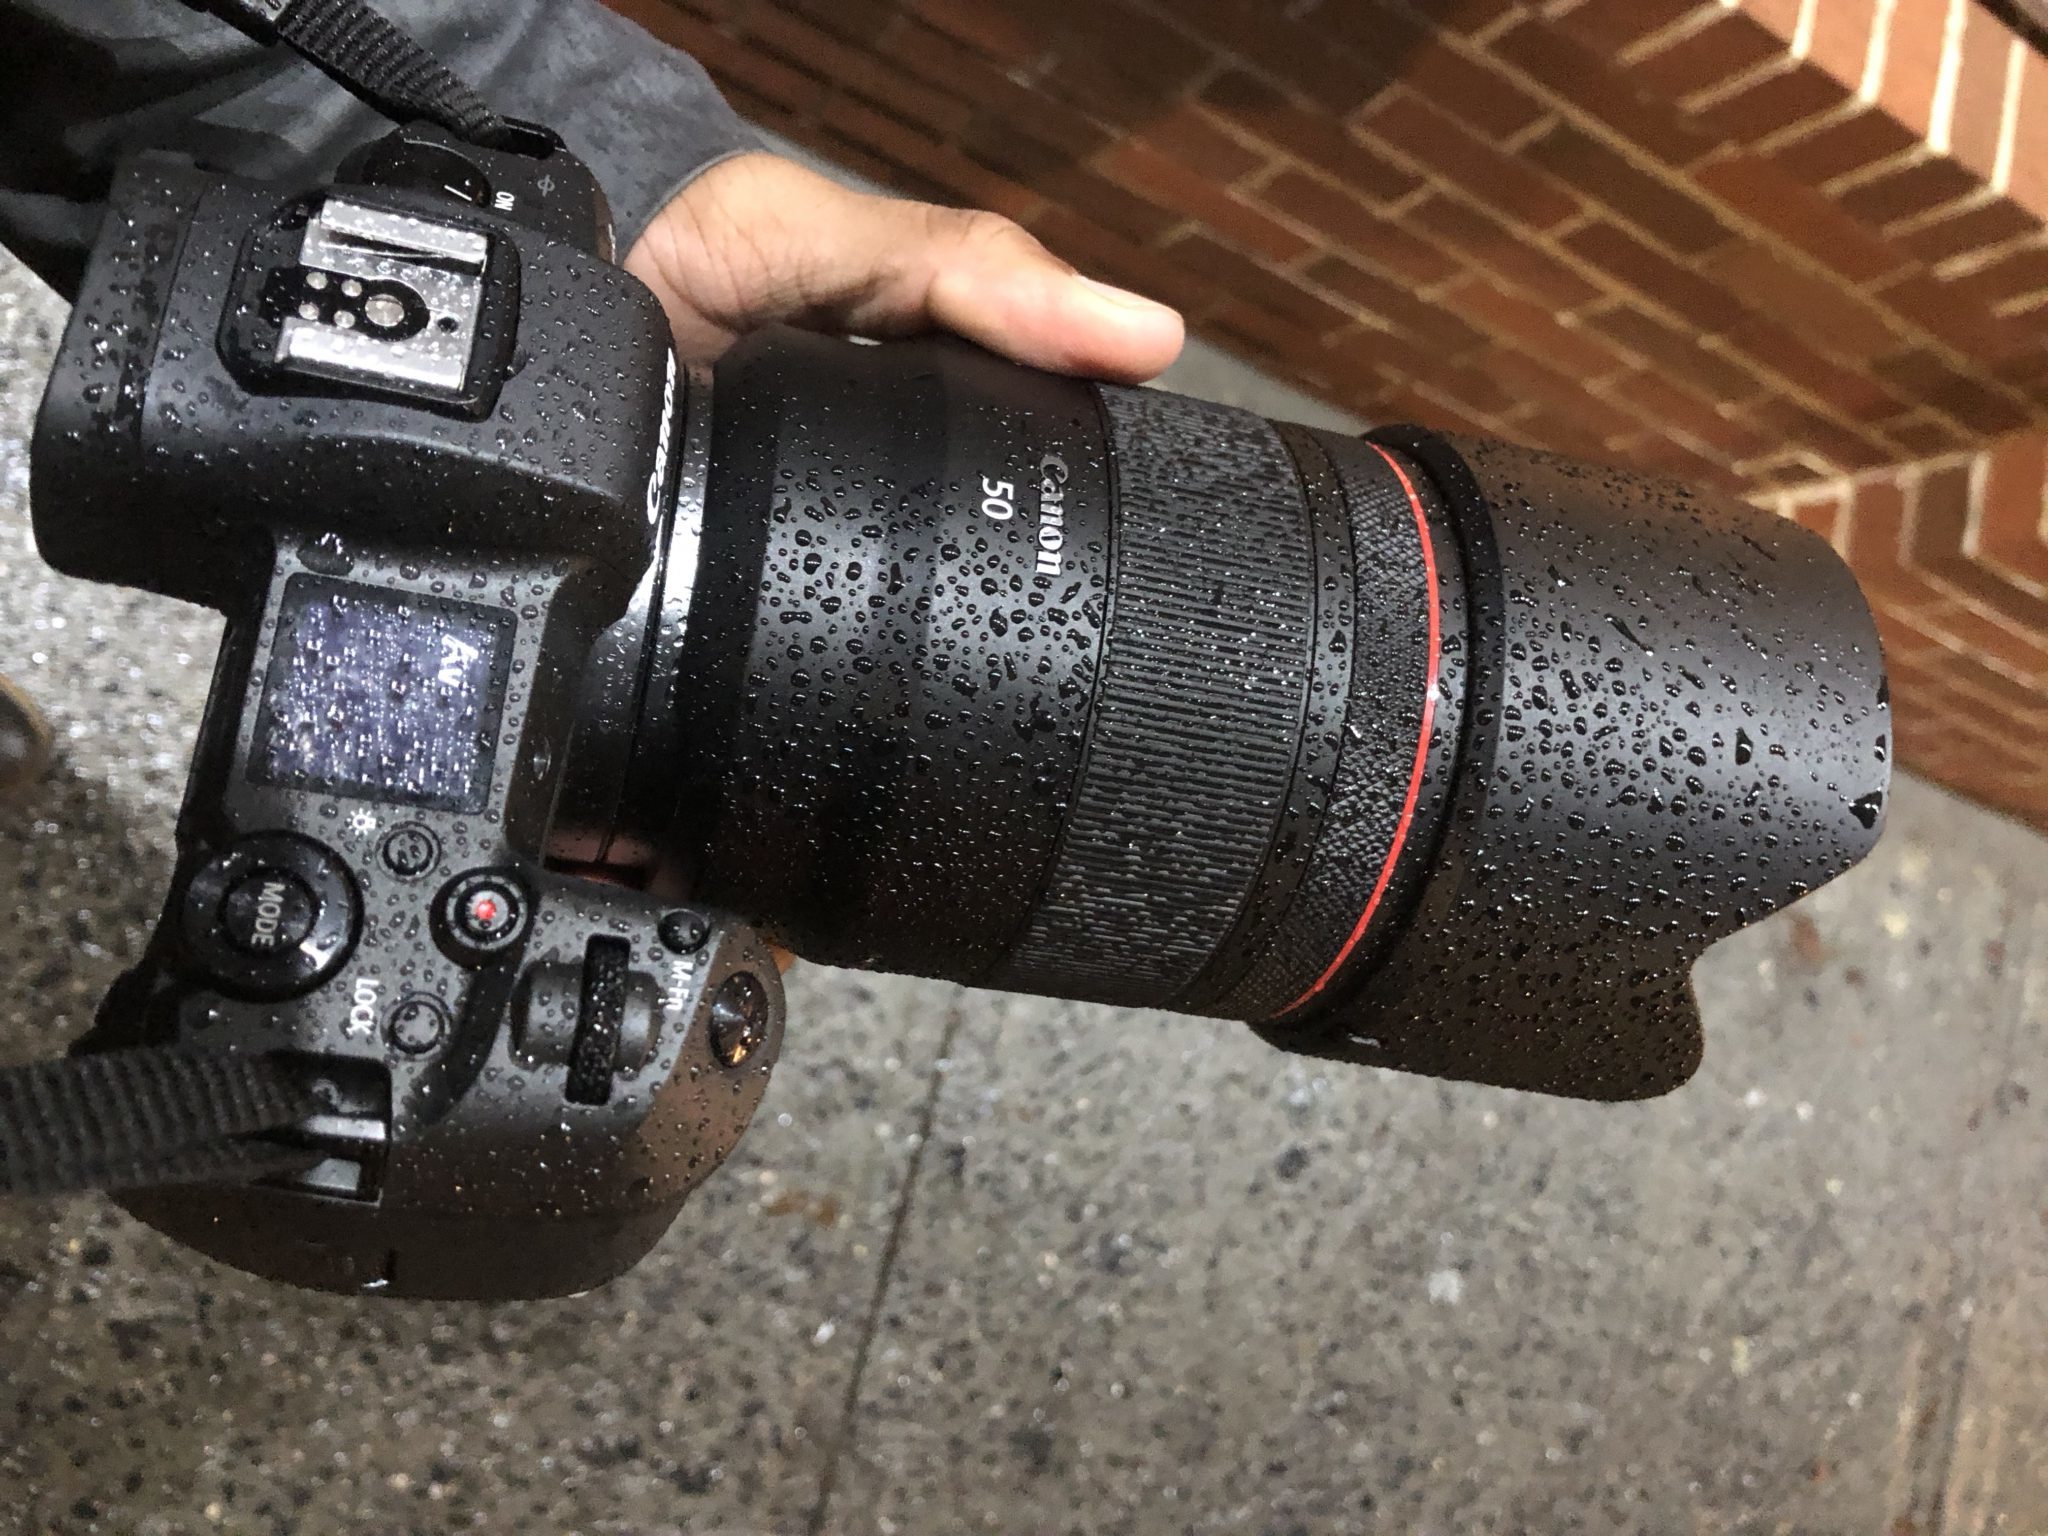 Rain Or Shine, These Great 50mm Primes Will Be Fine